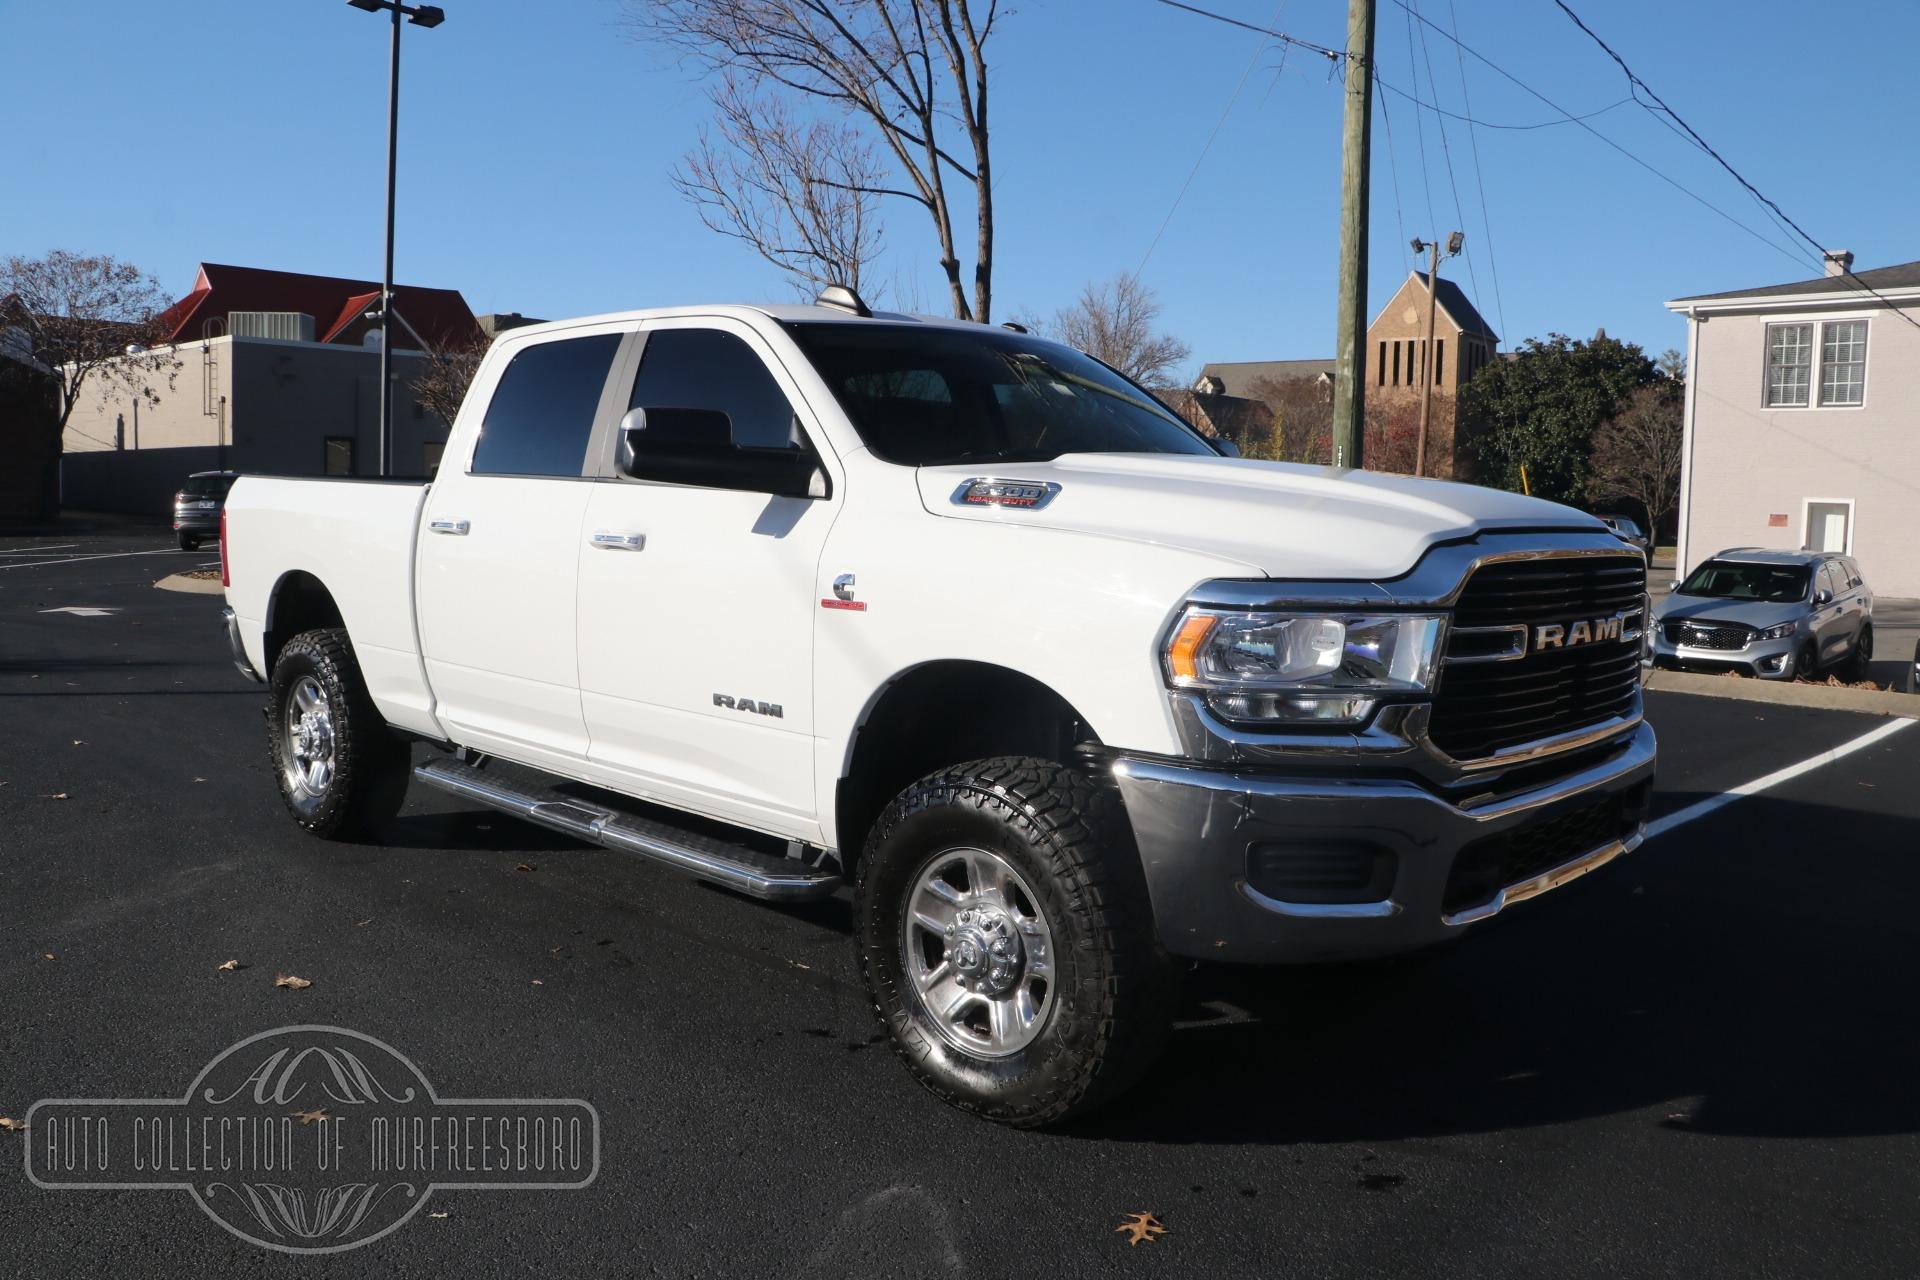 Used 2019 Ram Pickup 3500 Big Horn CREW CAB 4X4 6.7L Cummins Diesel Turbo for sale $45,900 at Auto Collection in Murfreesboro TN 37129 1